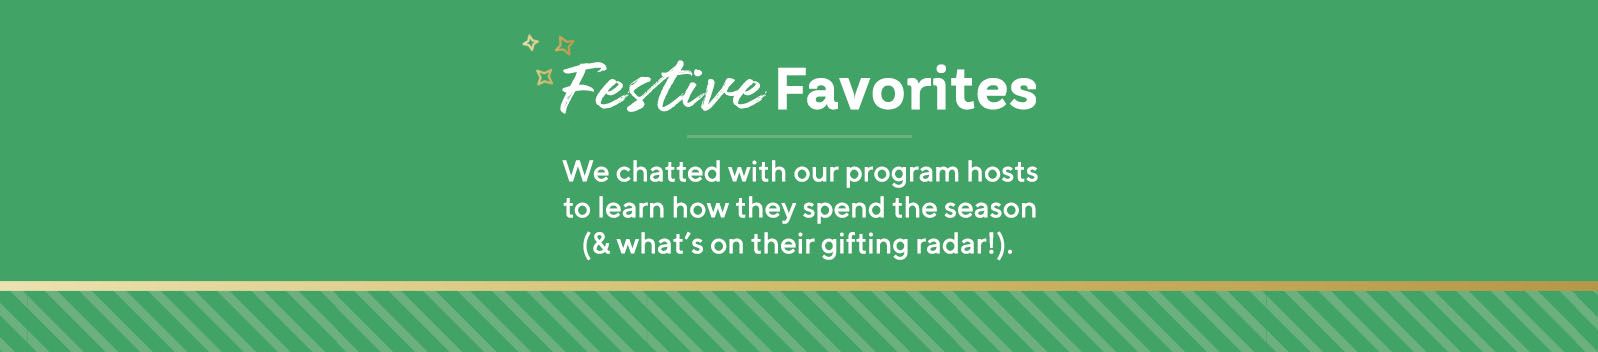 Festive Favorites: We chatted with our program hosts to learn how they spend the season (& what's on their gifting radar!). 